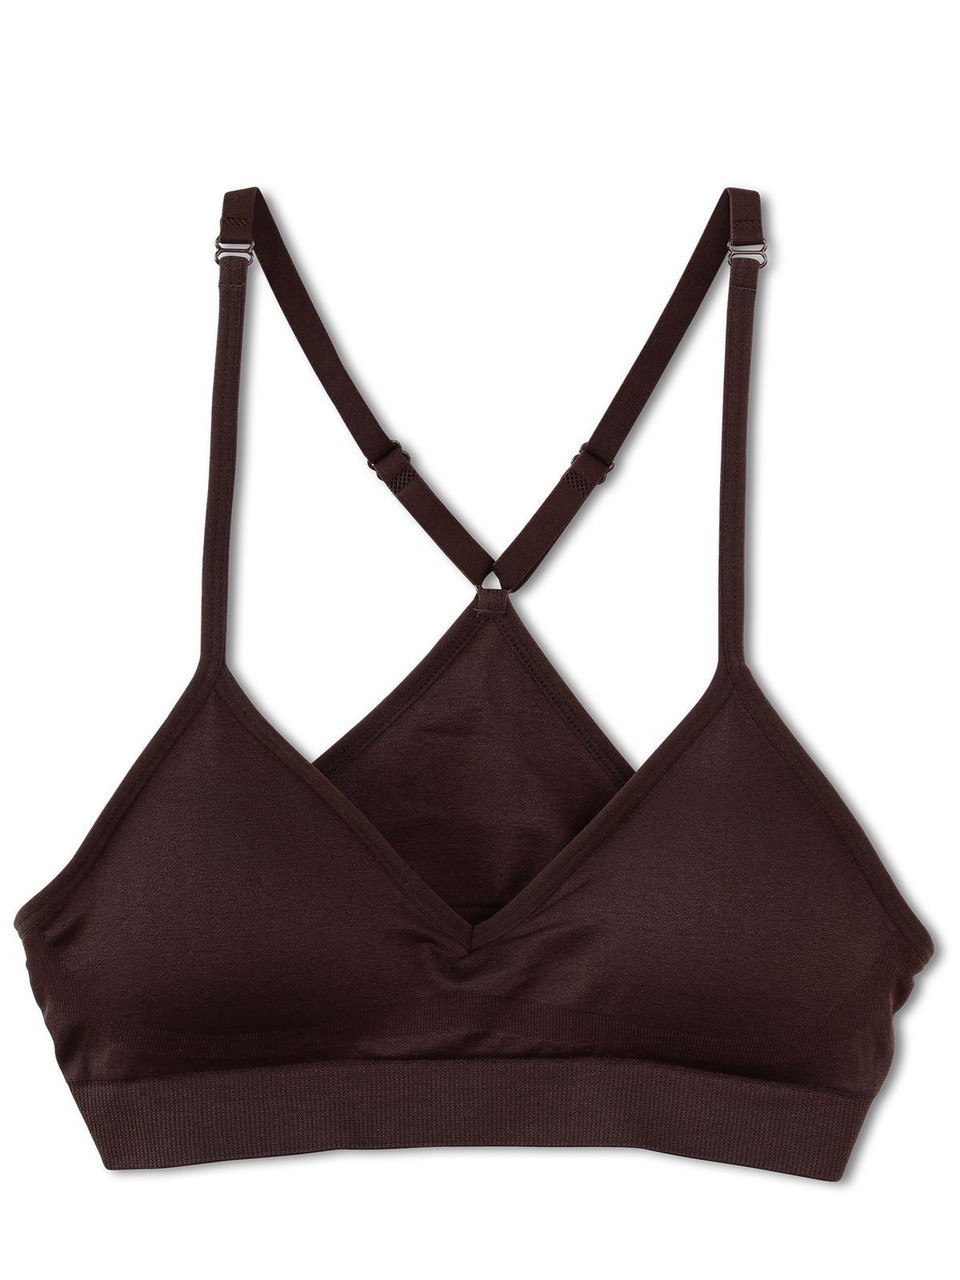 Contrast Underband Sports Bra with V Back Strap Detail